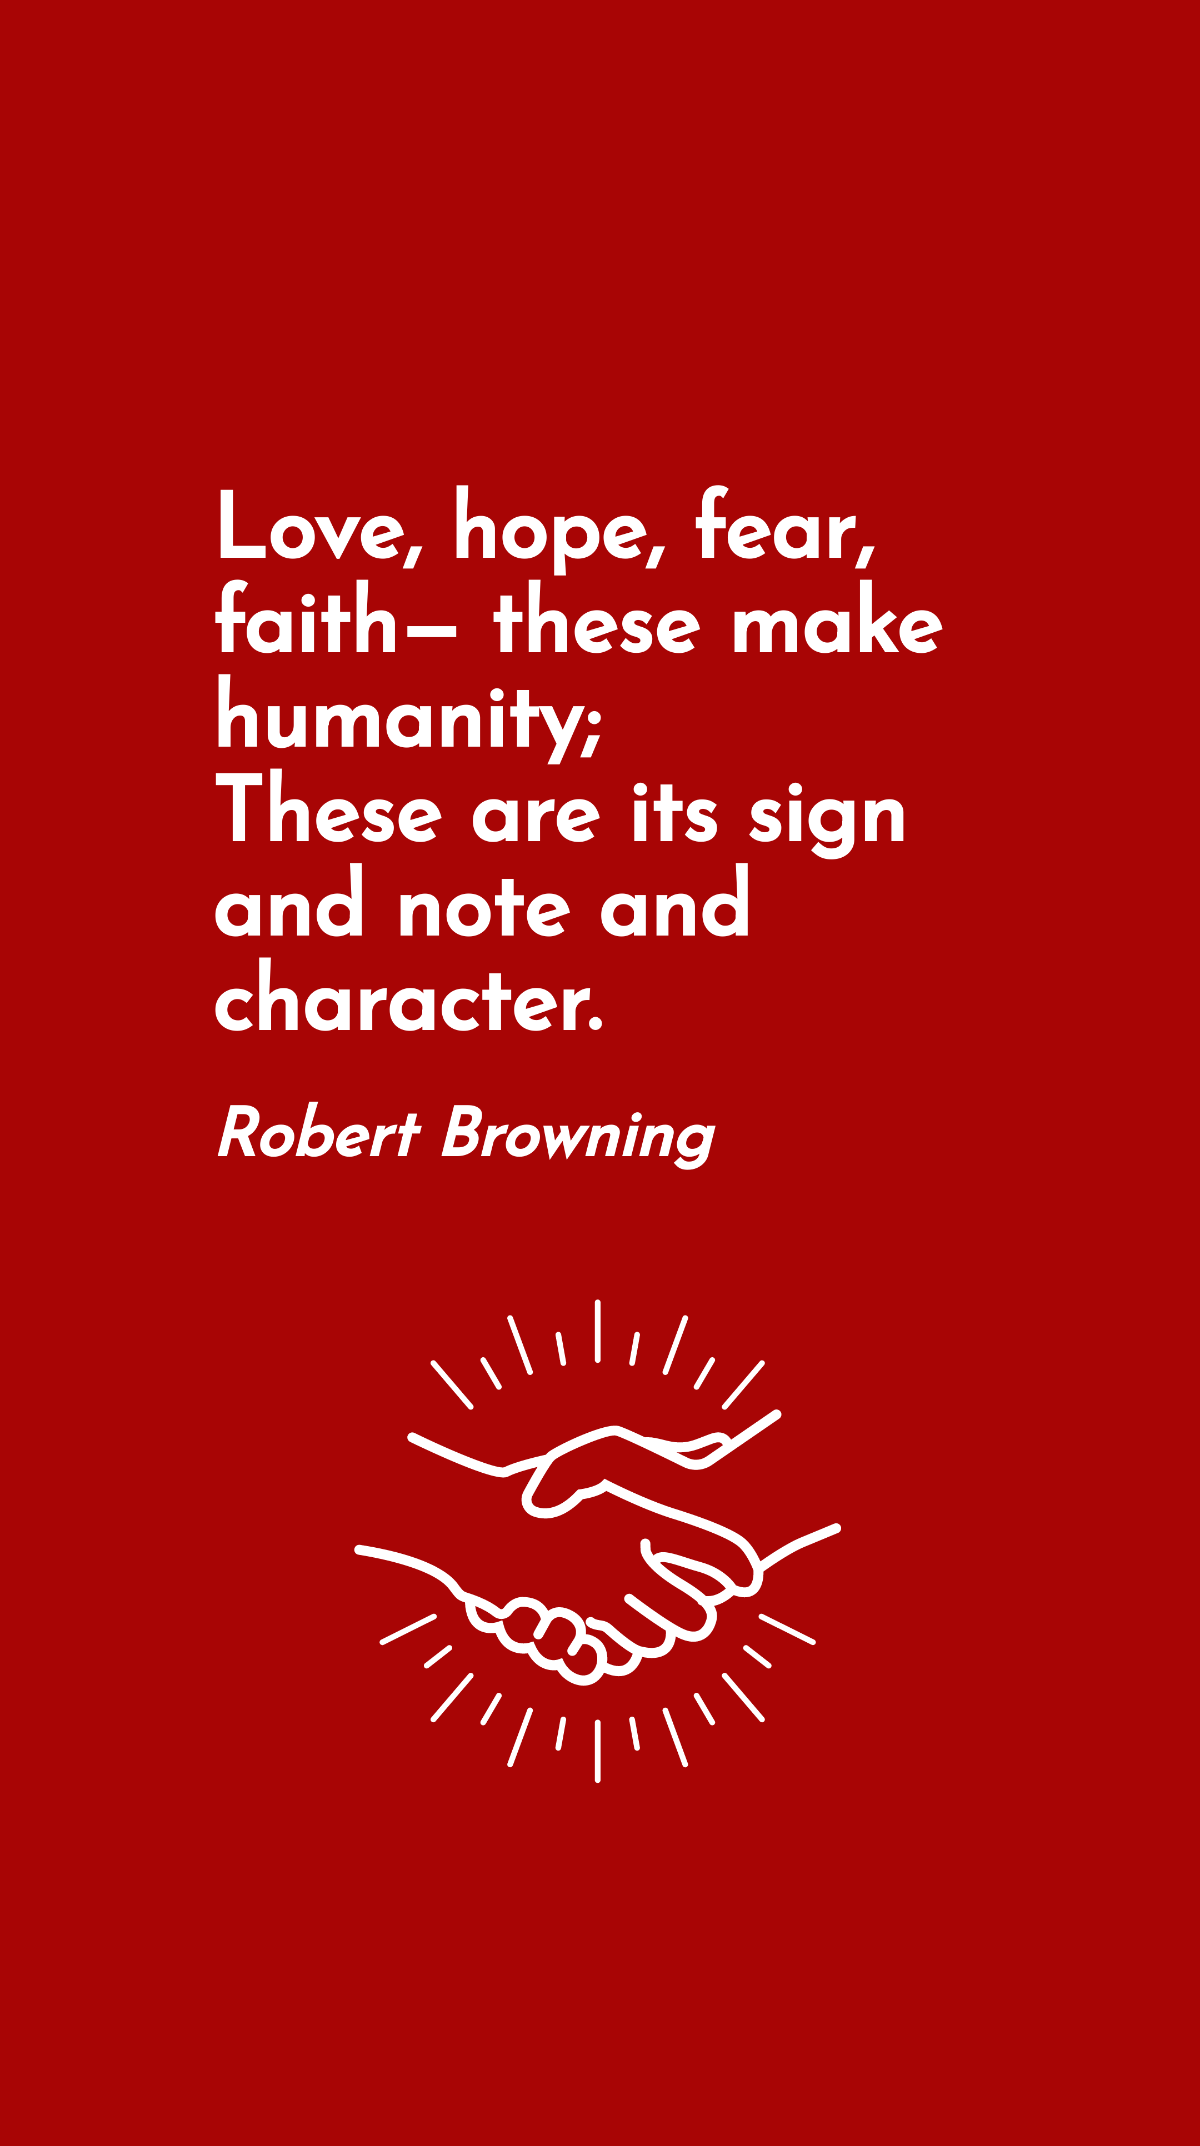 Robert Browning - Love, hope, fear, faith - these make humanity; These are its sign and note and character. Template